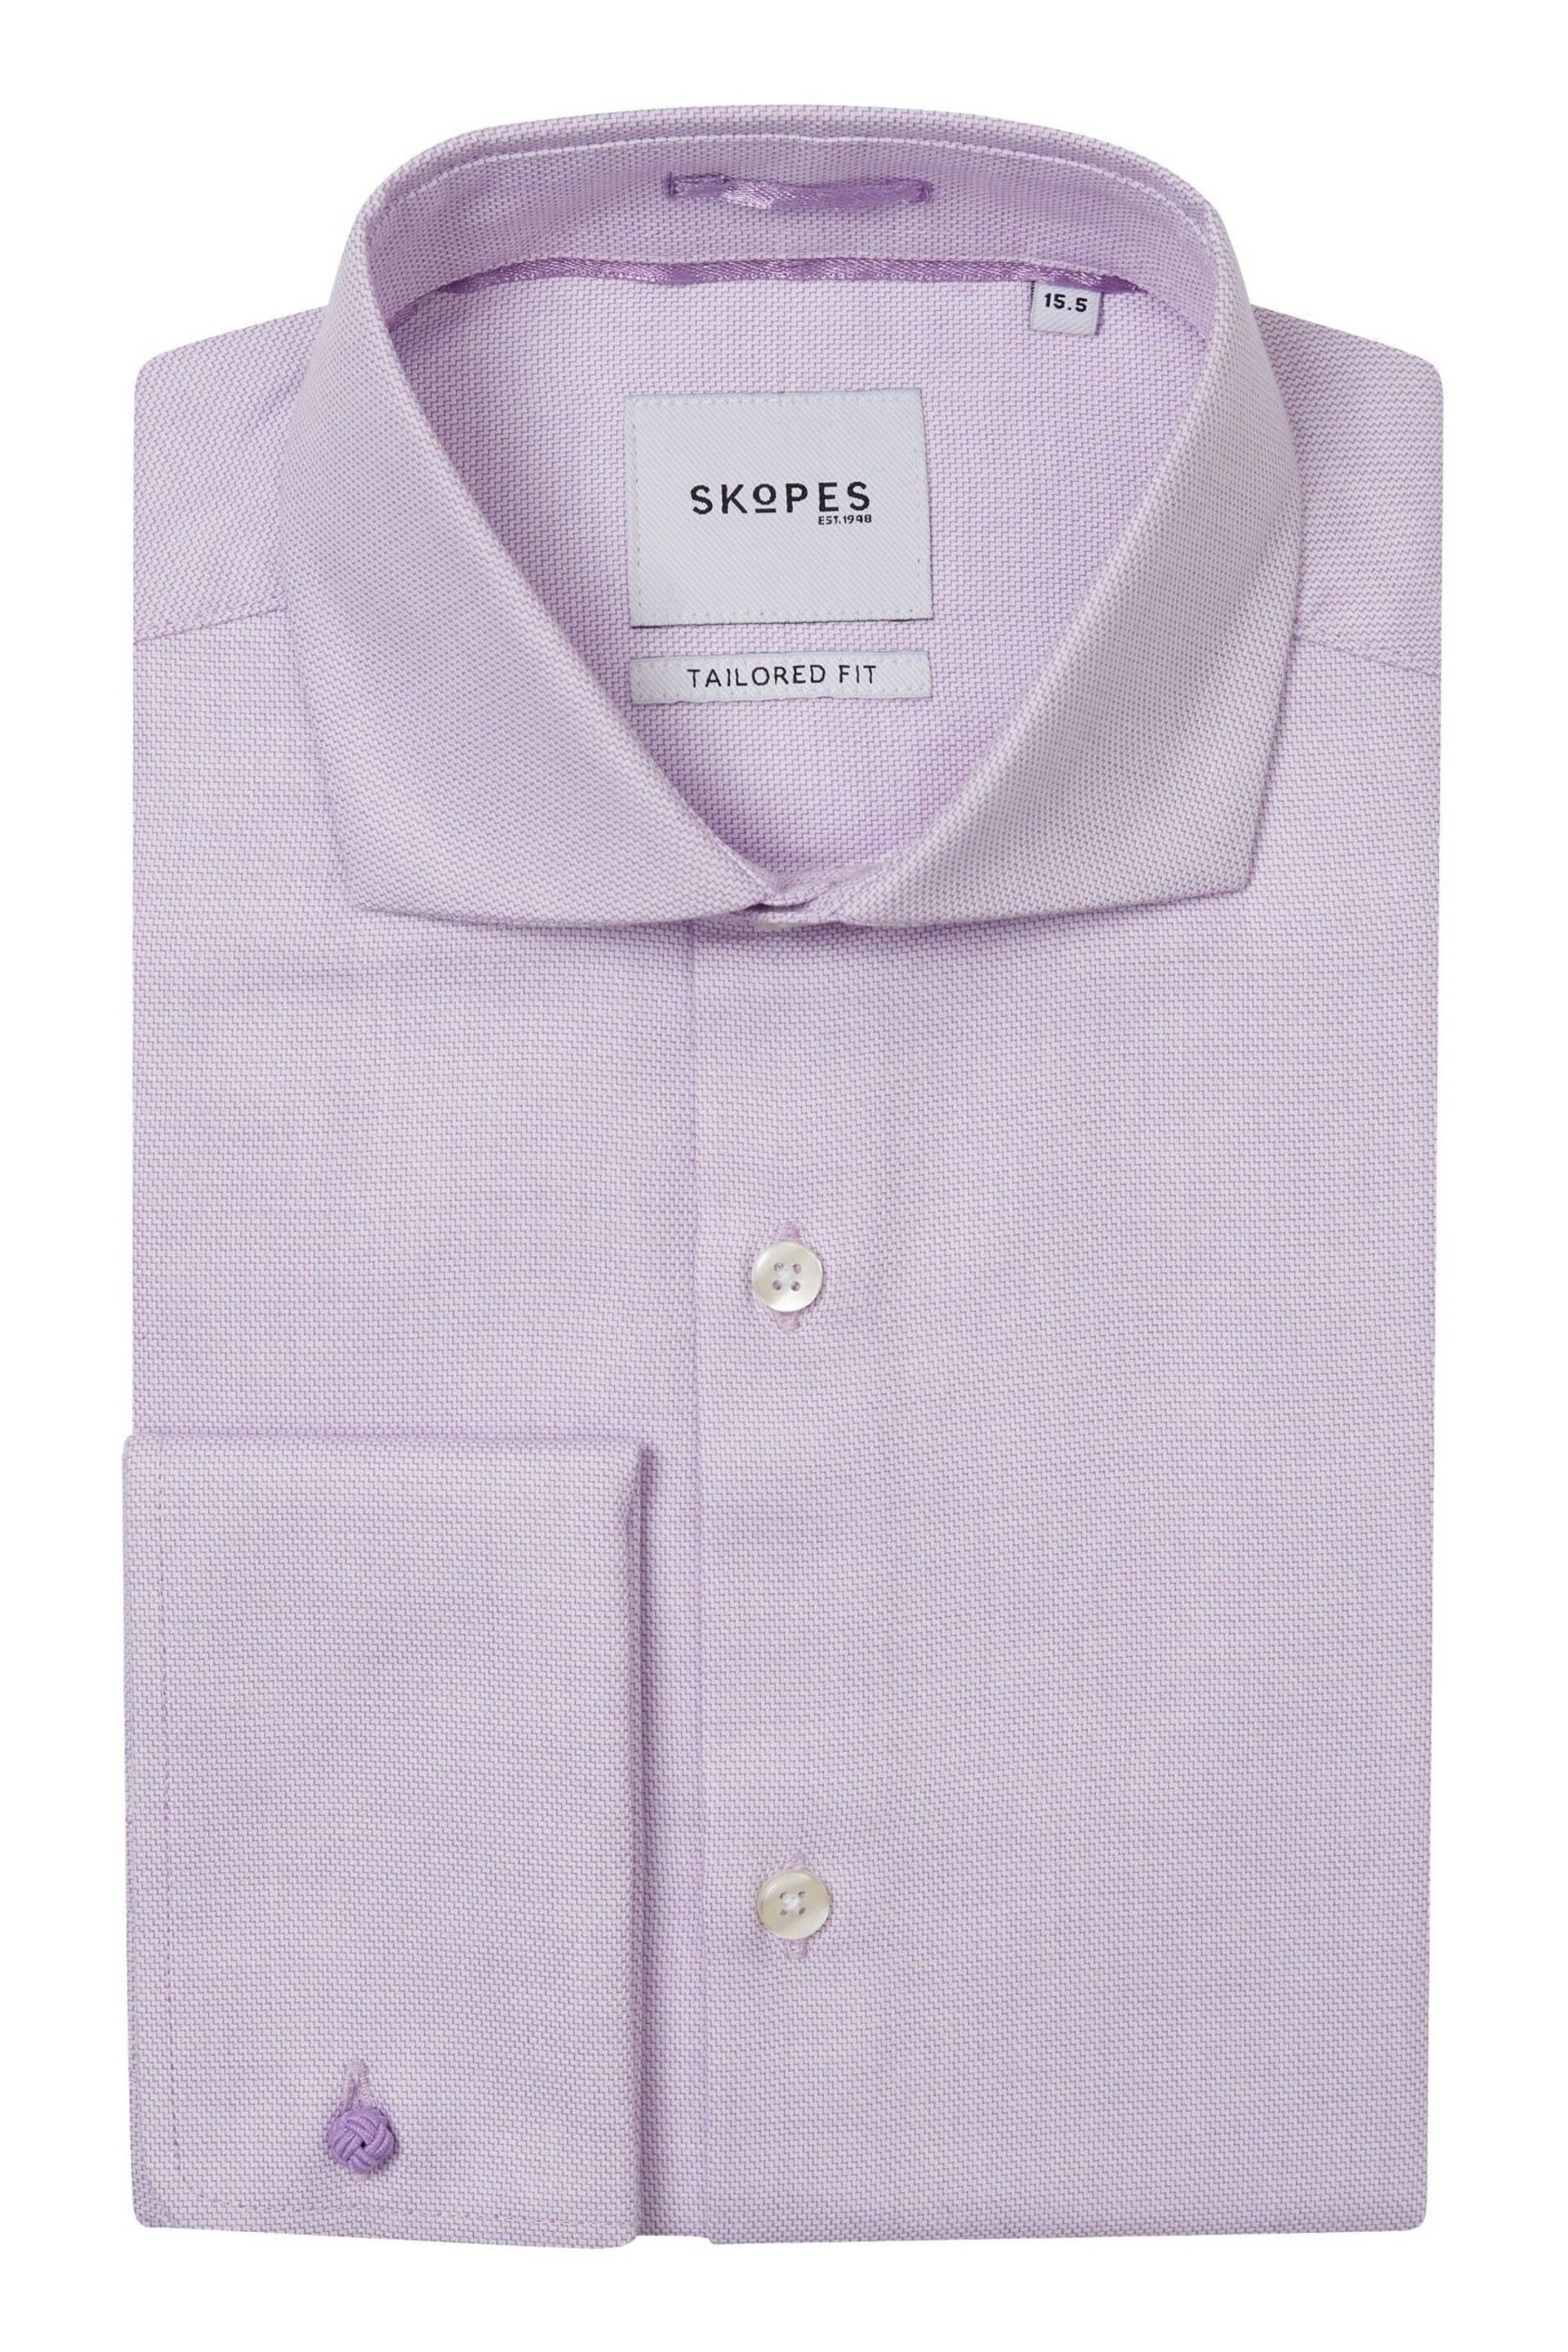 Skopes Double Cuff Dobby Shirt - Image 4 of 6